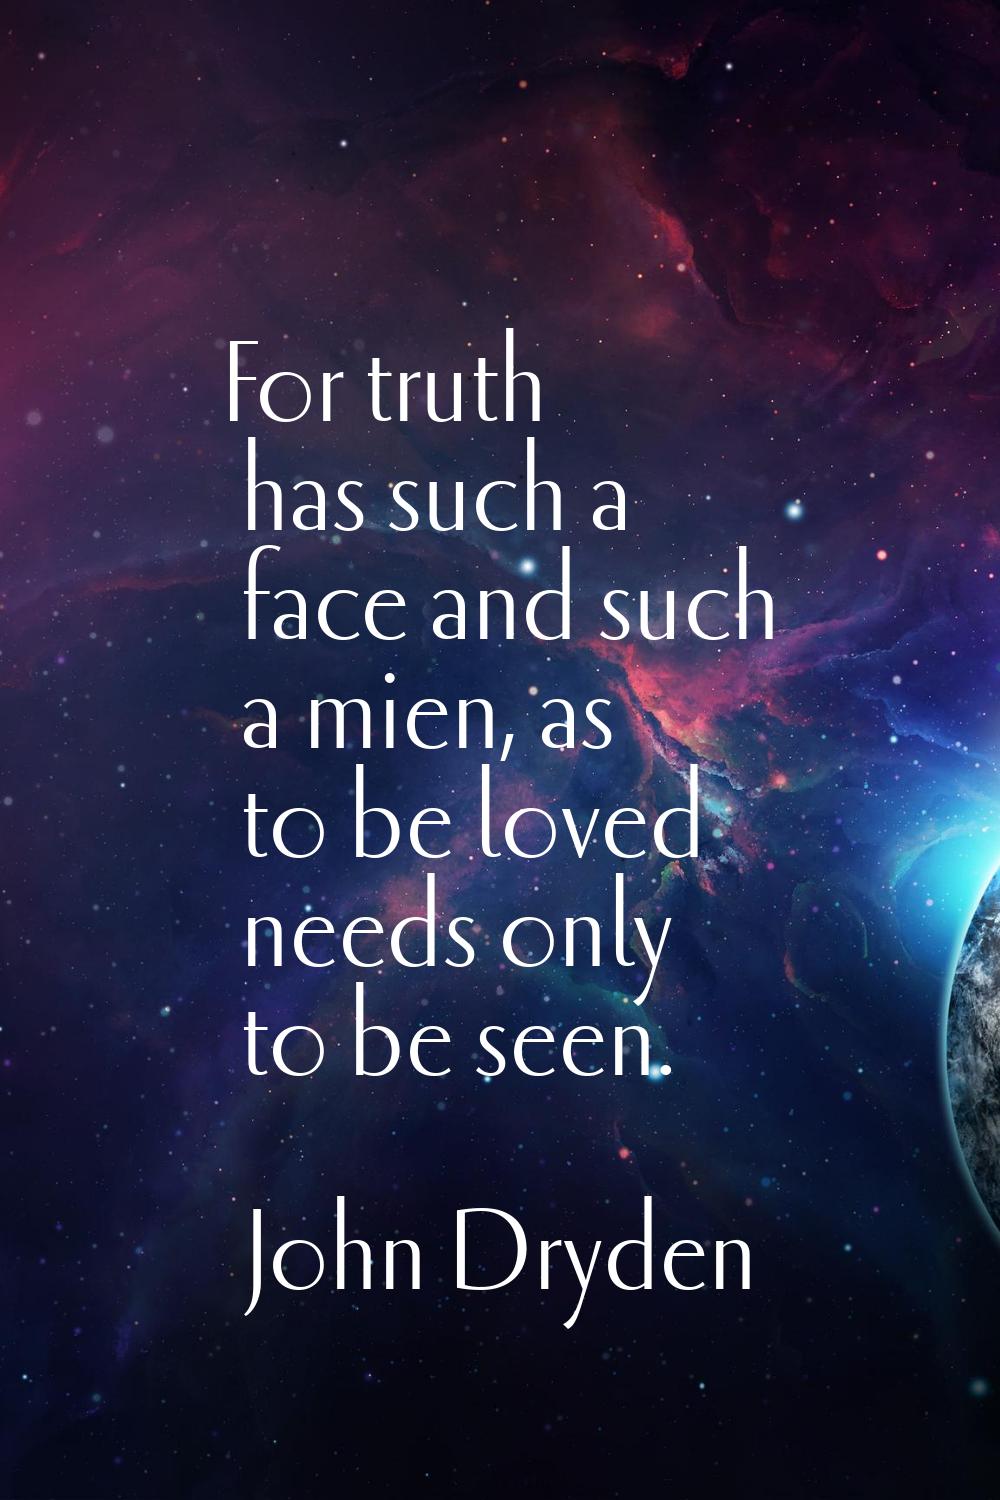 For truth has such a face and such a mien, as to be loved needs only to be seen.